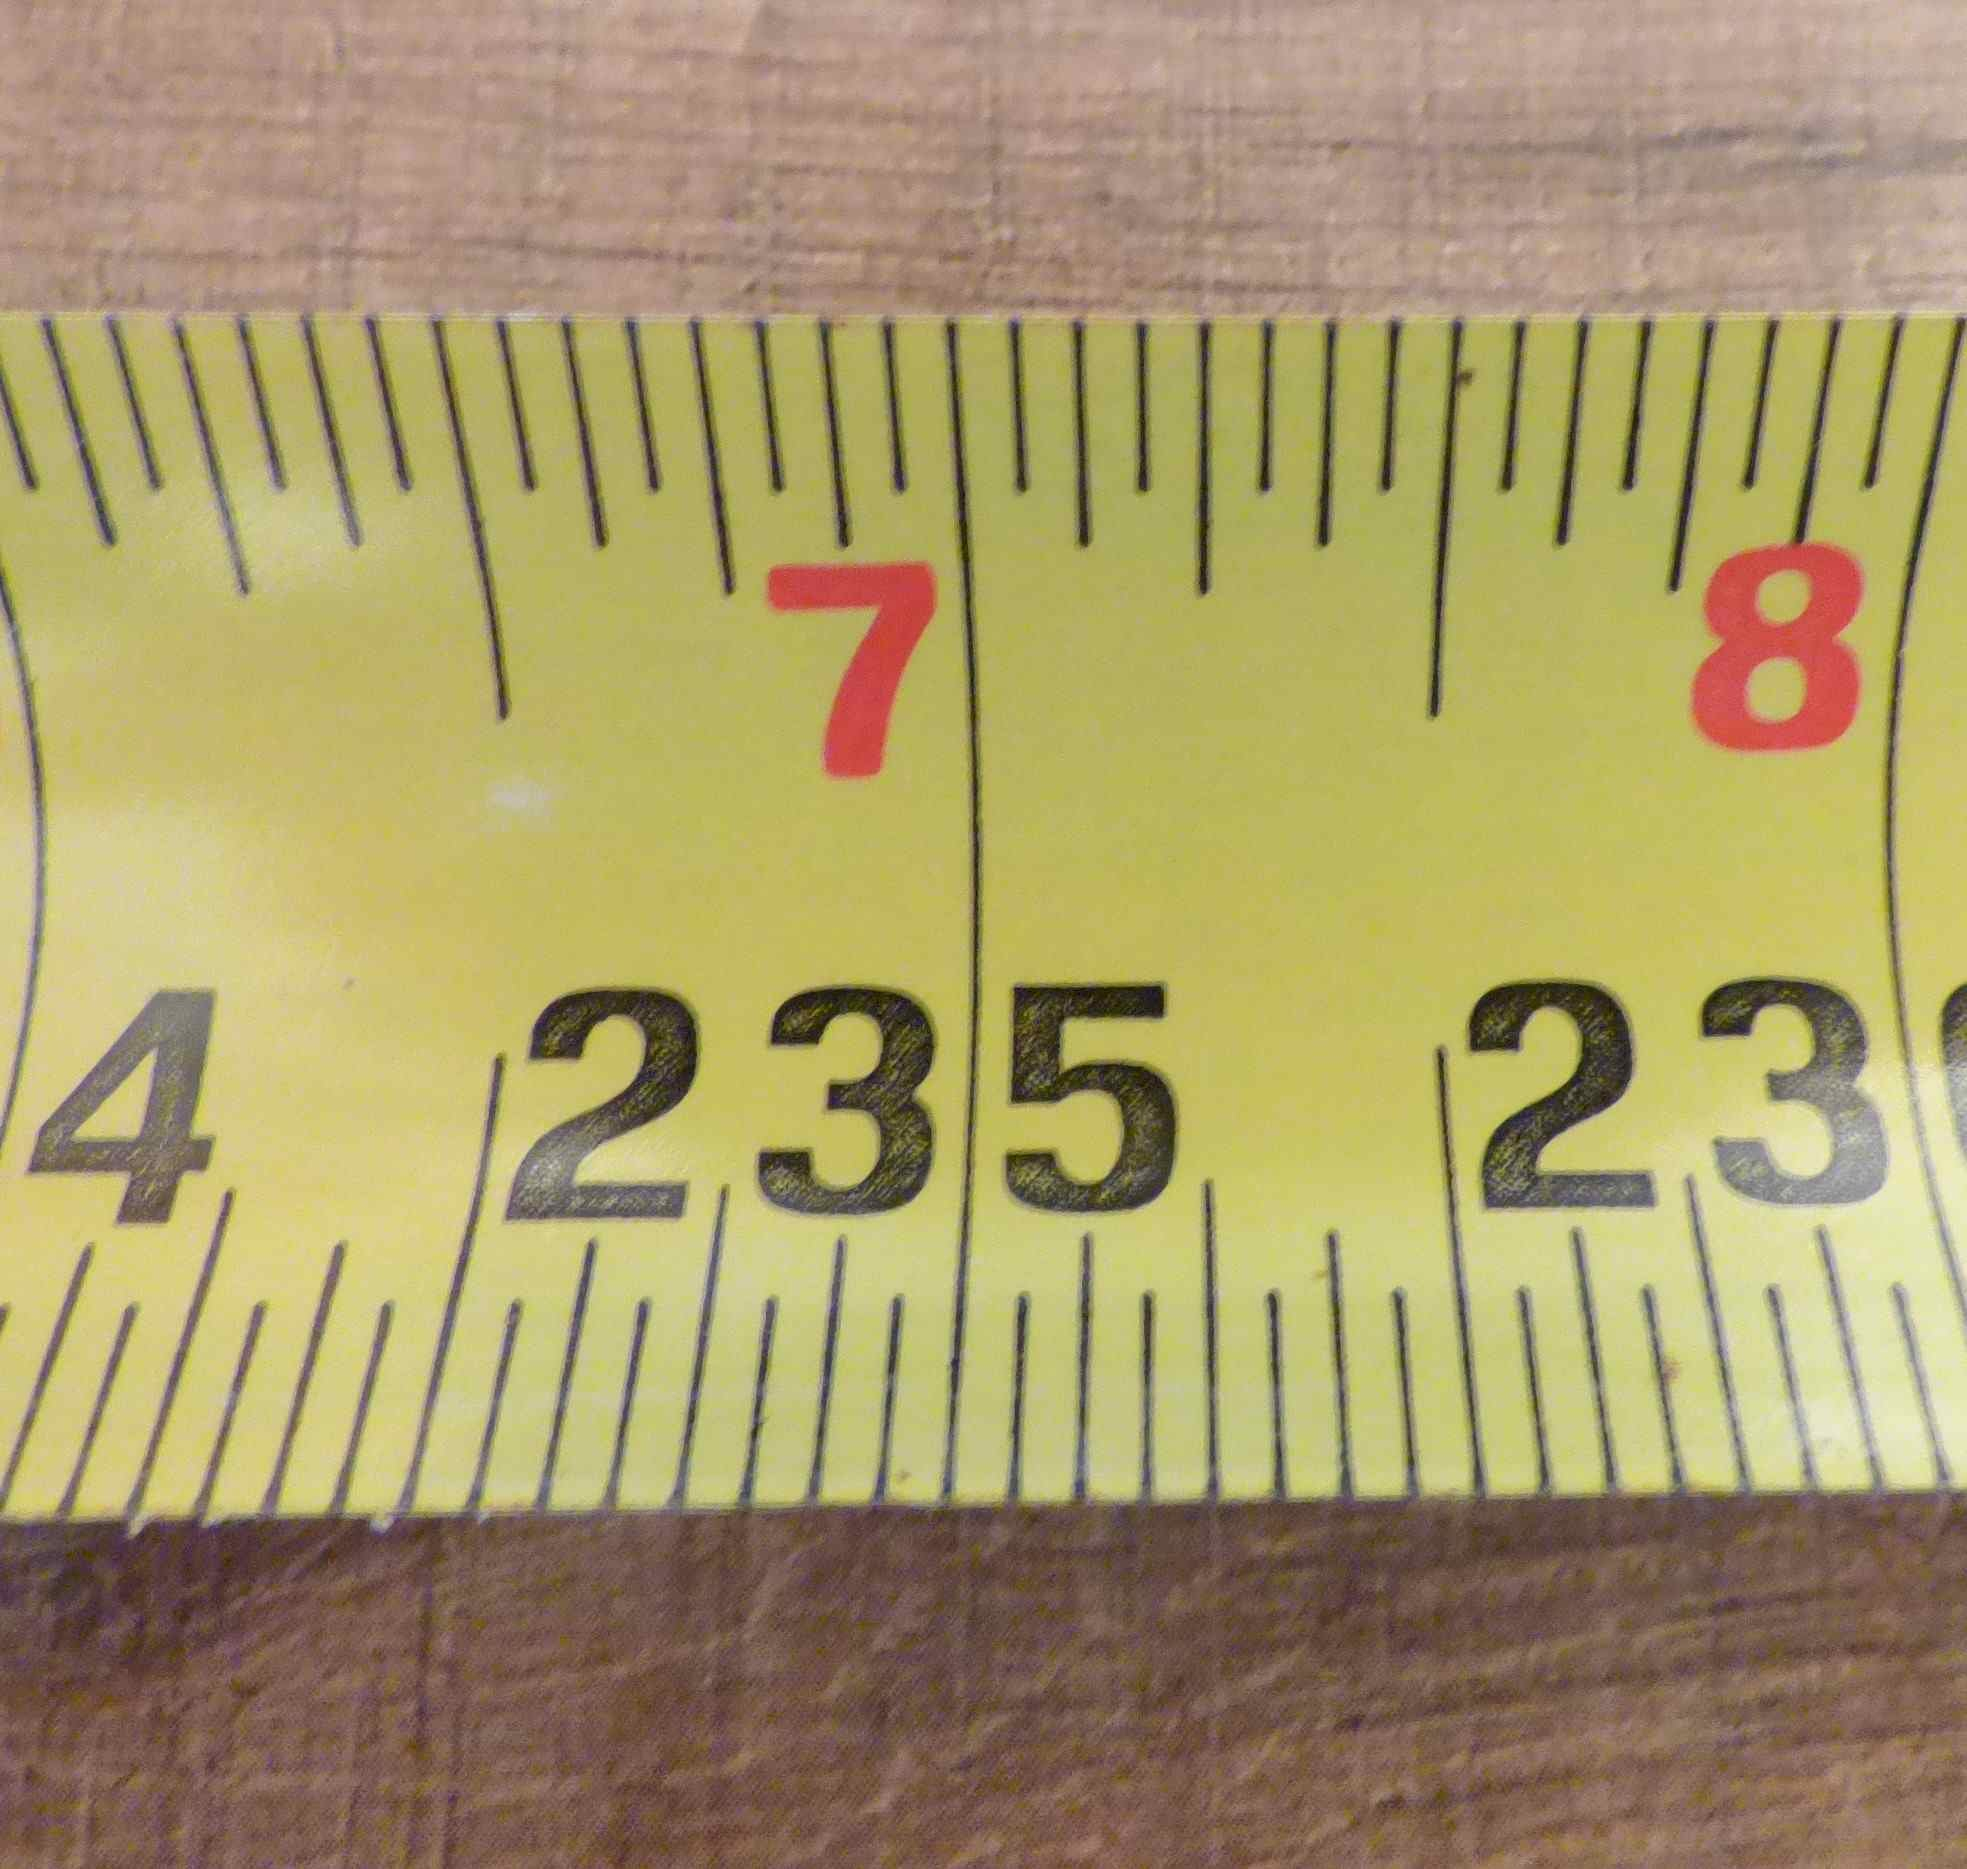 How To Read A Tape Measure And Reading A Tape Measure Worksheet